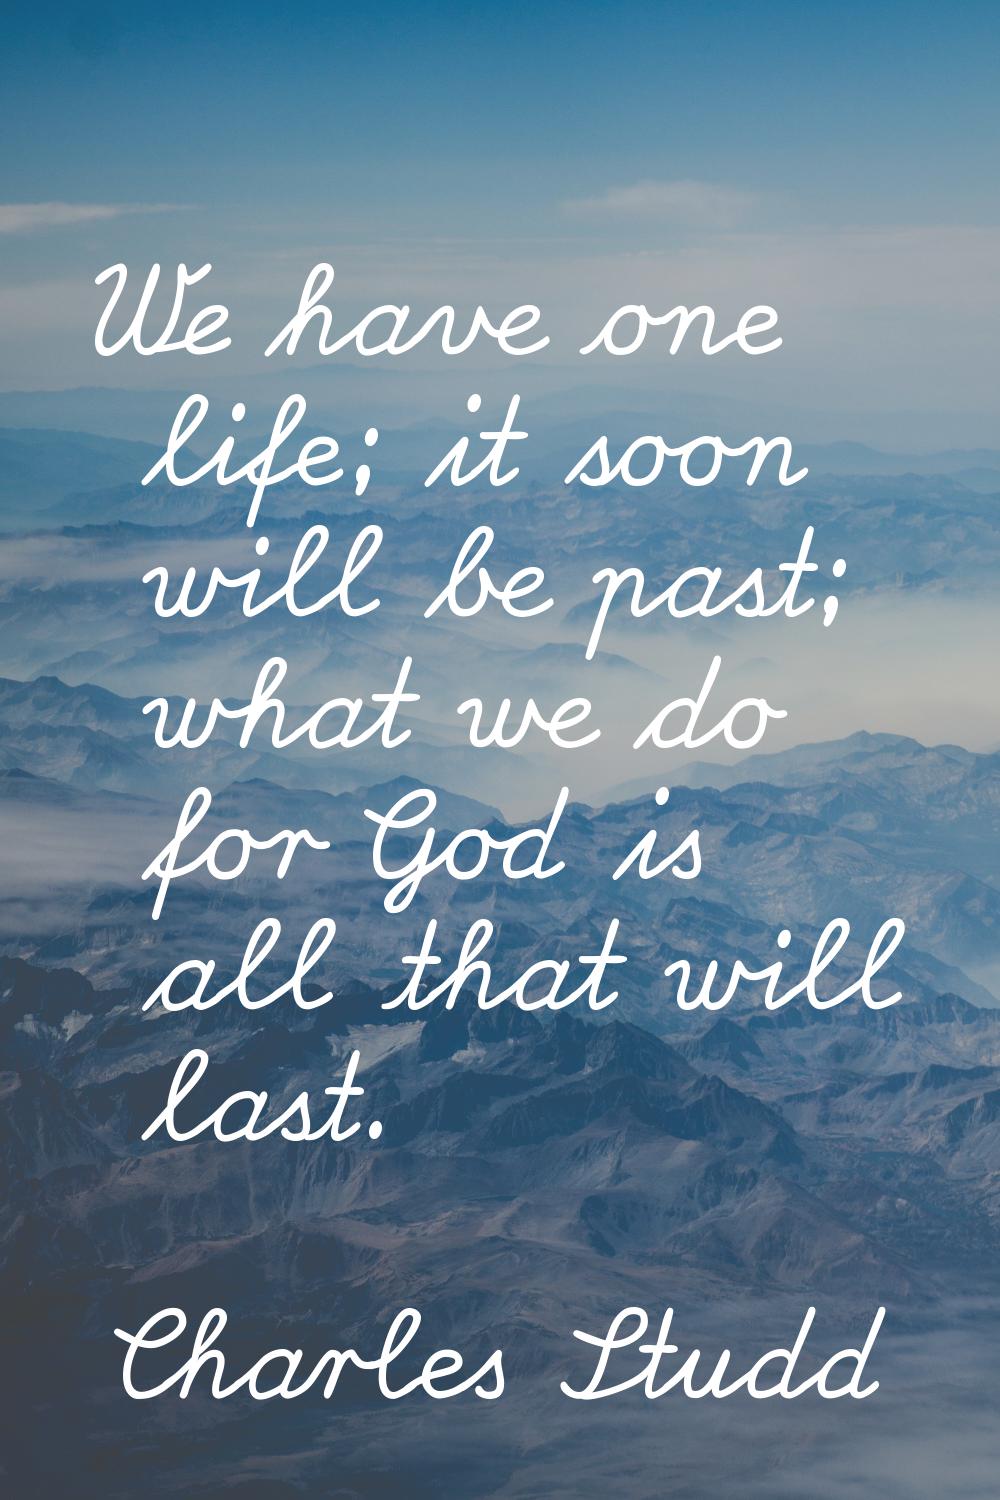 We have one life; it soon will be past; what we do for God is all that will last.